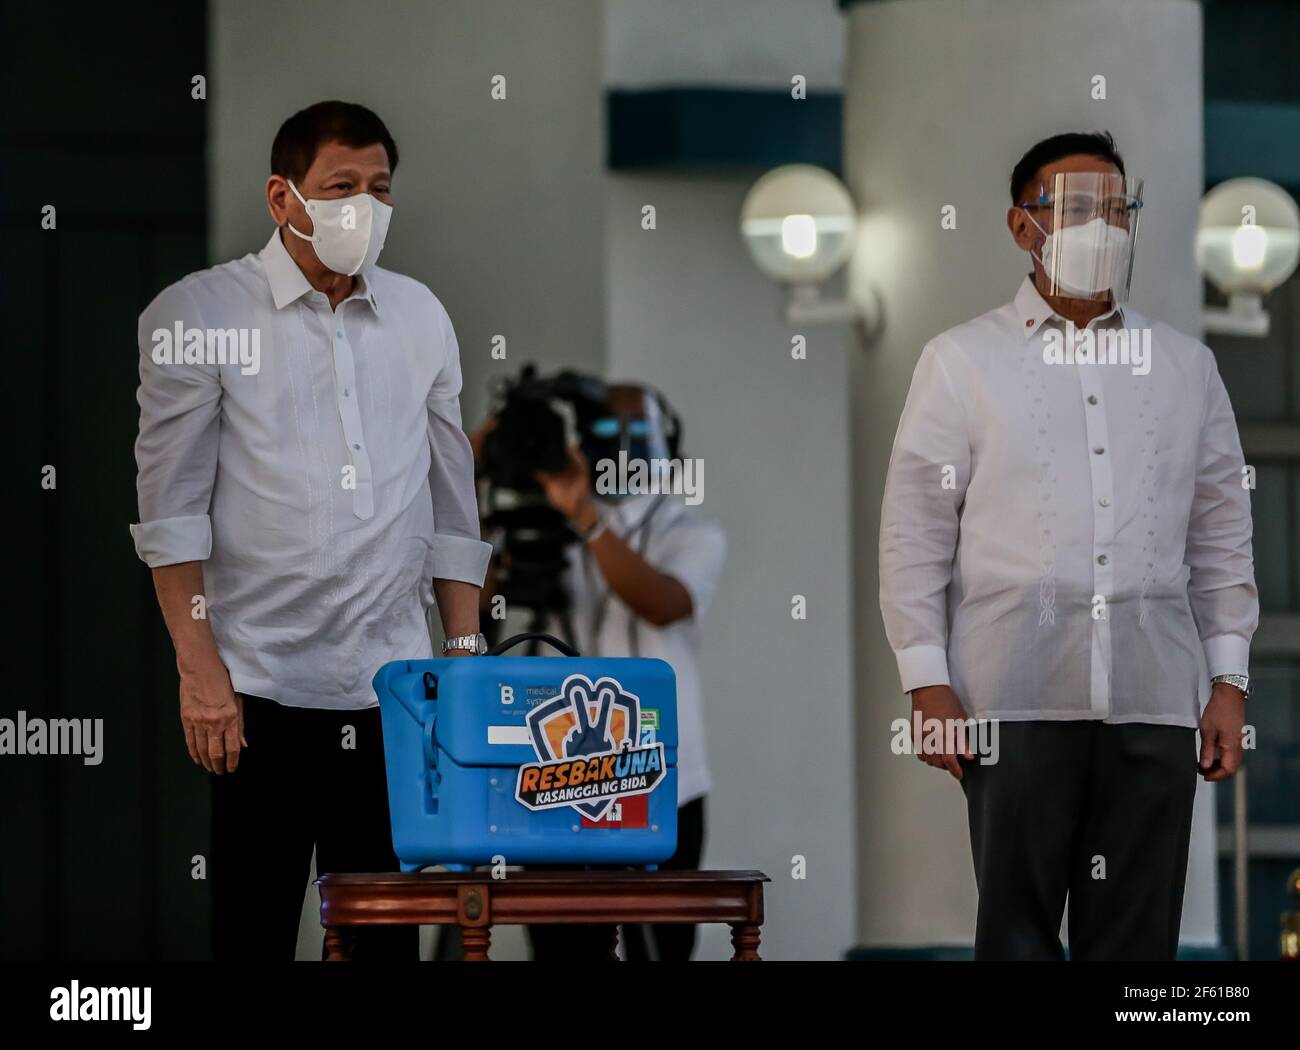 Manila, Philippines. 29th Mar, 2021. Philippine President Rodrigo Duterte (L) stands beside Health Secretary Francisco Duque as they present a case containing government-purchased Sinovac COVID-19 vaccines in Manila, the Philippines, on March 29, 2021. The Philippines on Monday received the first batch of the Sinovac COVID-19 vaccines its government has purchased from China. Credit: Rouelle Umali/Xinhua/Alamy Live News Stock Photo